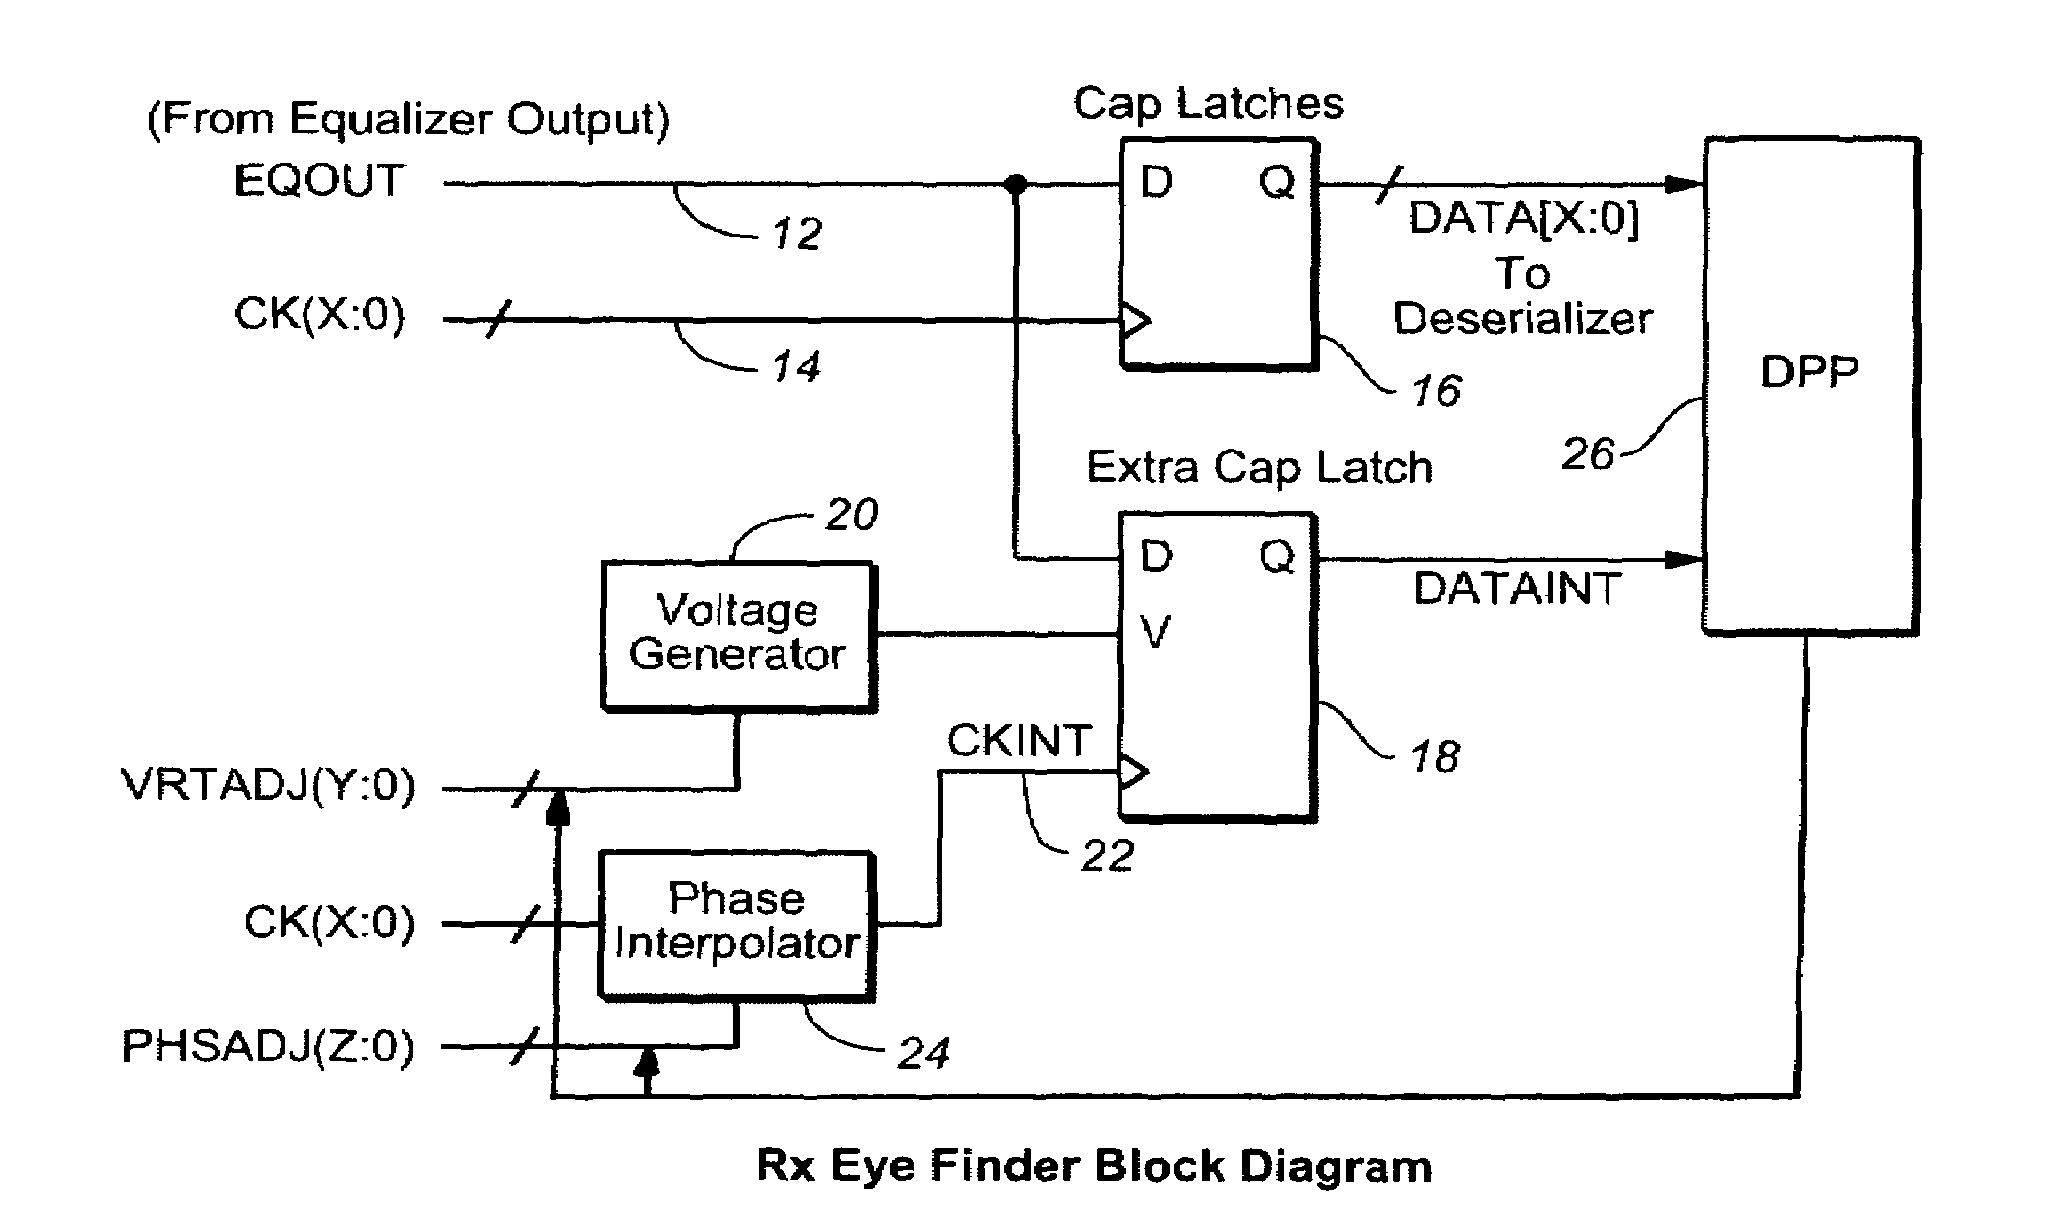 On-chip receiver eye finder circuit for high-speed serial link